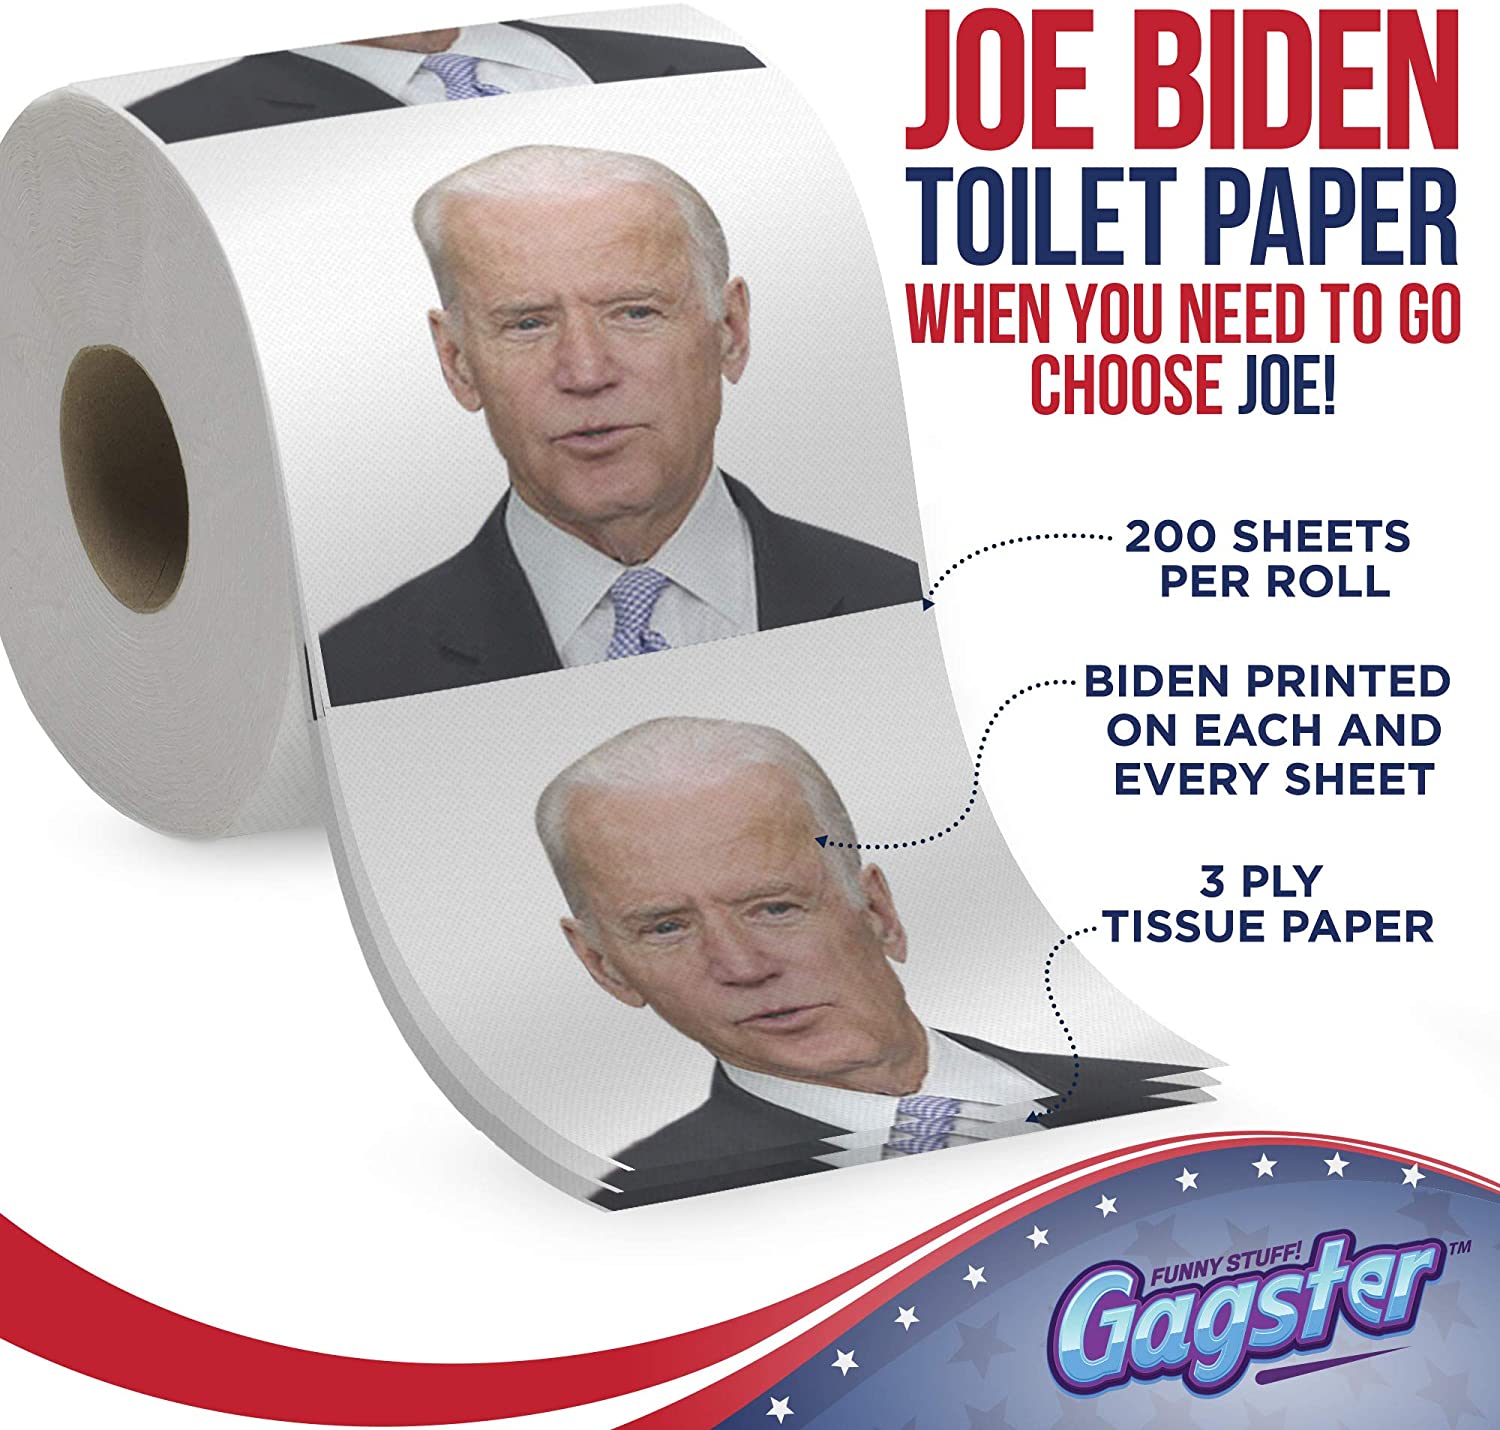 Joe Biden Toilet Paper Roll - Funny Political Novelty Gag Gift - 3 Ply Bathroom Tissue 200 Sheets in Each Roll - Laugh Out Loud Joke with Image Printed on Every Sheet | Hilarious White Elephant Idea